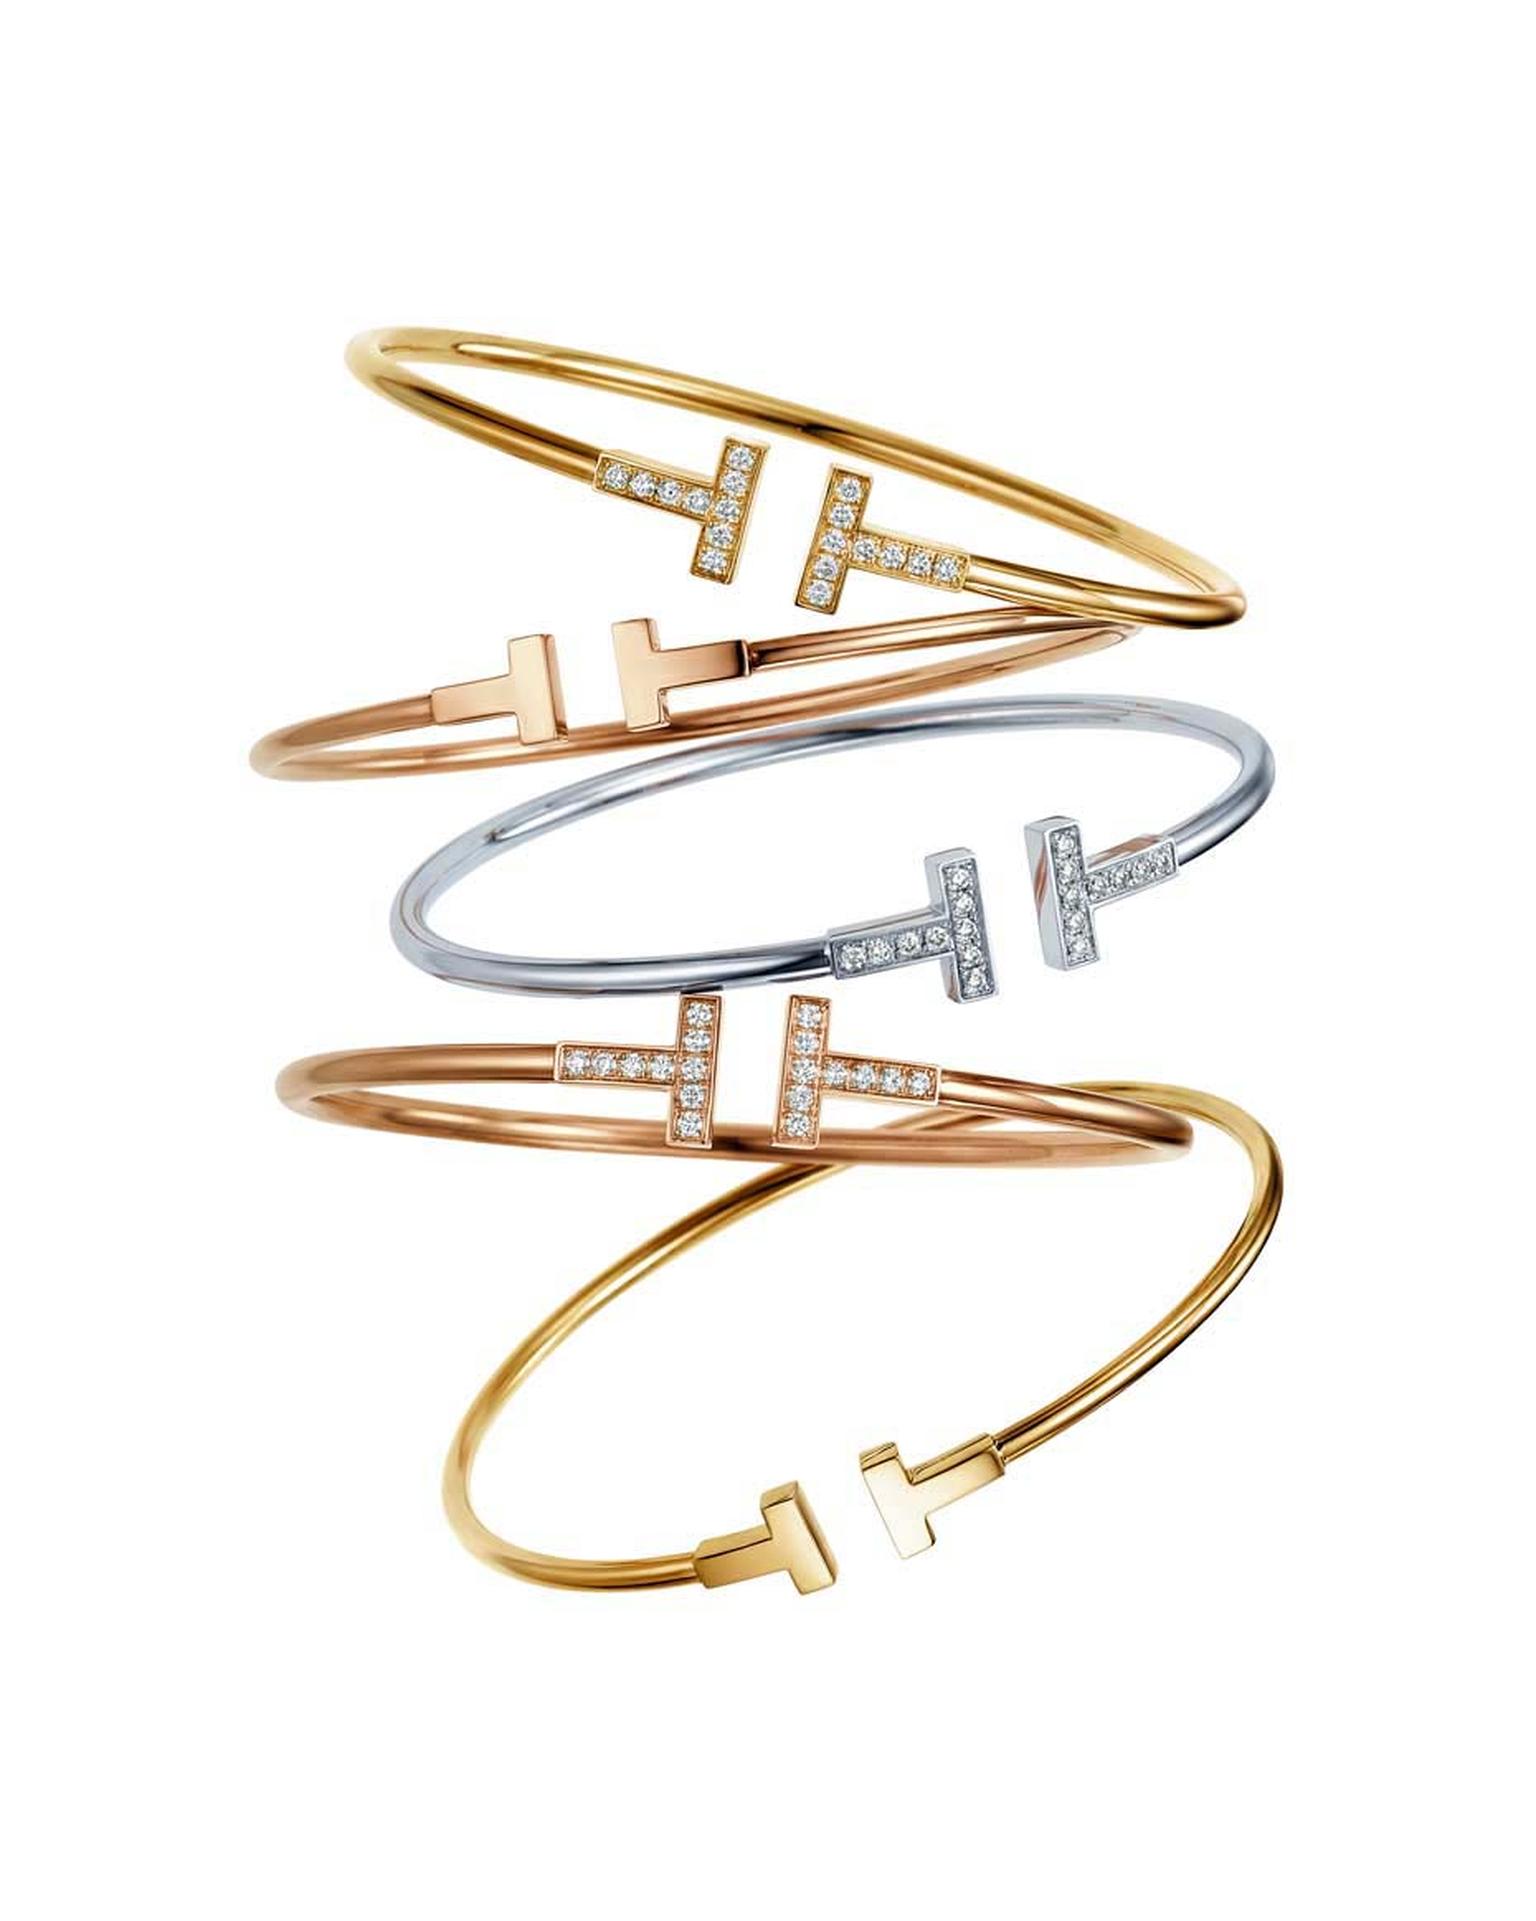 Two graphic diamond-studded T's accentuate the simple lines of the Tiffany & Co. Tiffany T collection wire bracelets, available in white, yellow and rose gold, with or without diamonds.